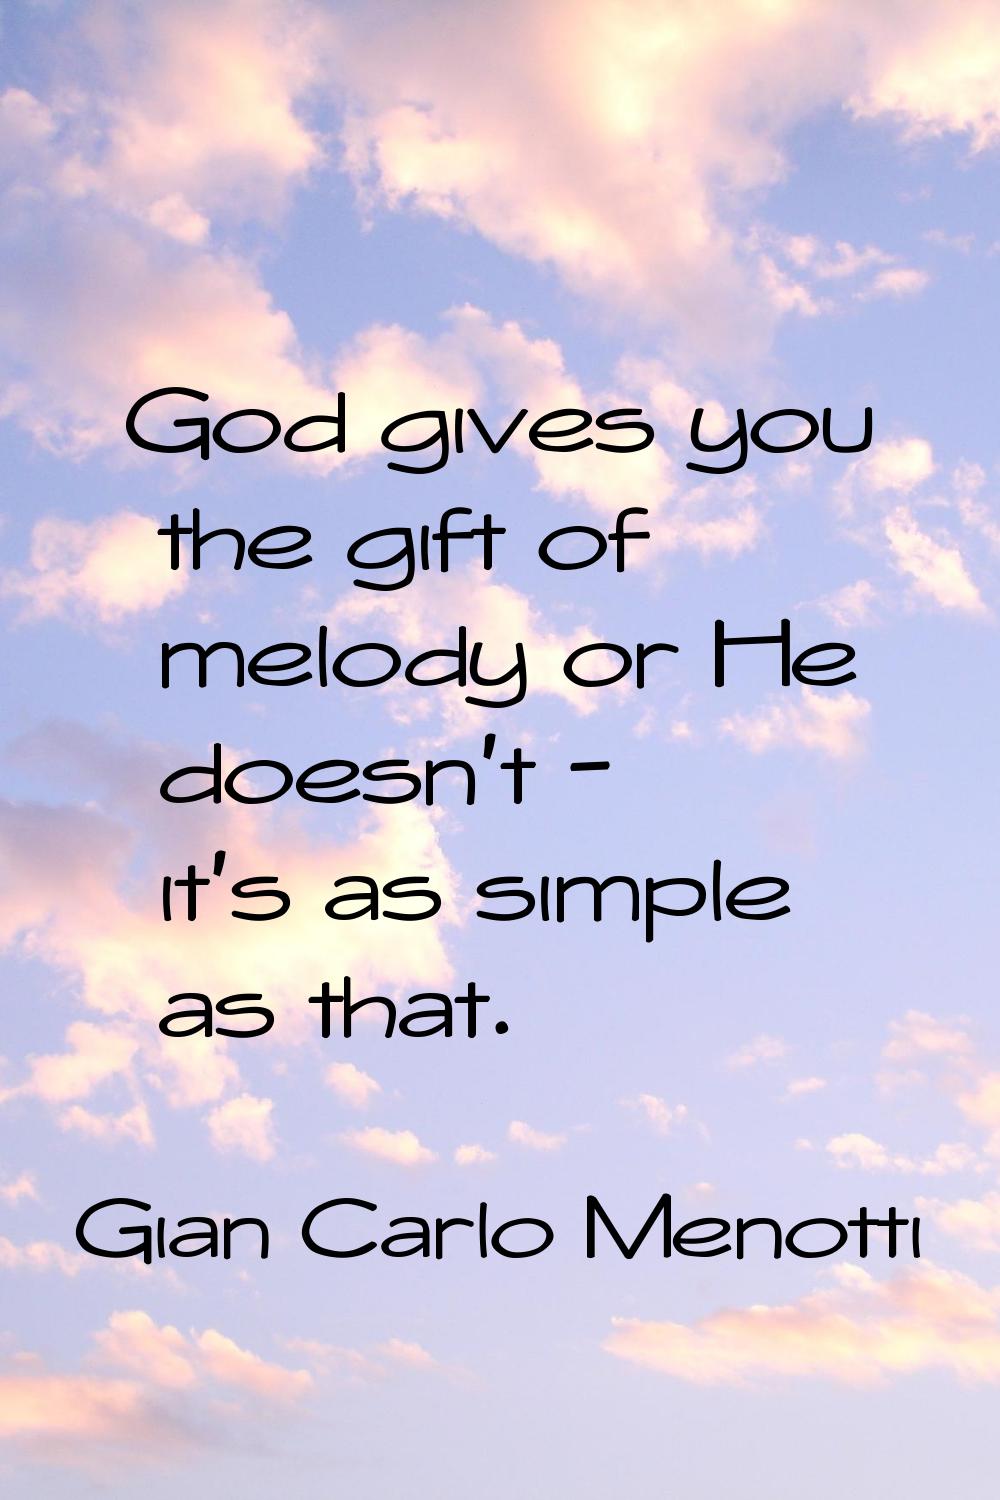 God gives you the gift of melody or He doesn't - it's as simple as that.